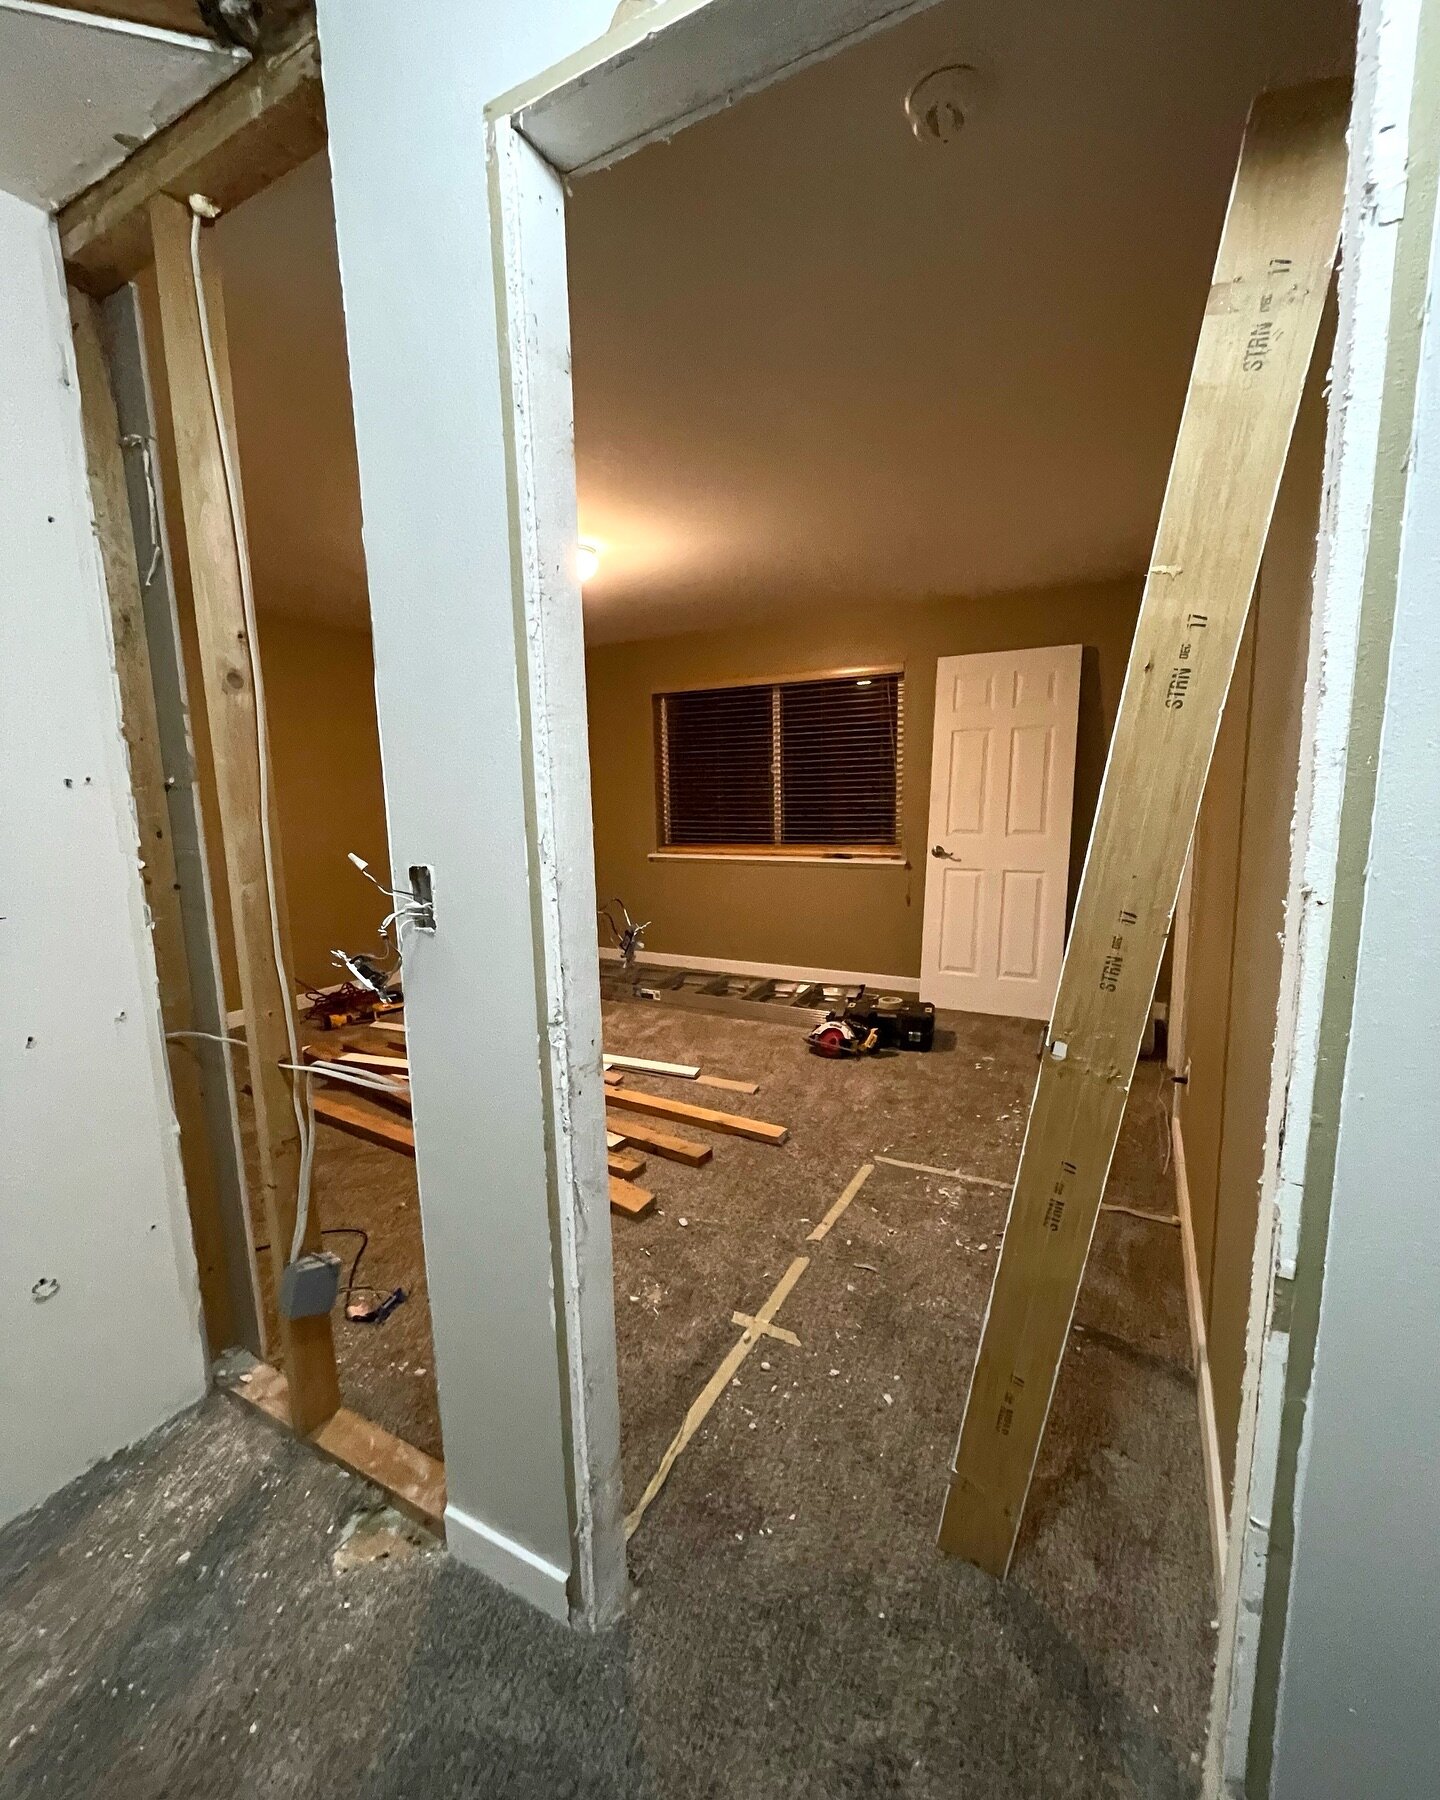 Day 1 of remodeling our home! Stay tuned to see what we do with this space.